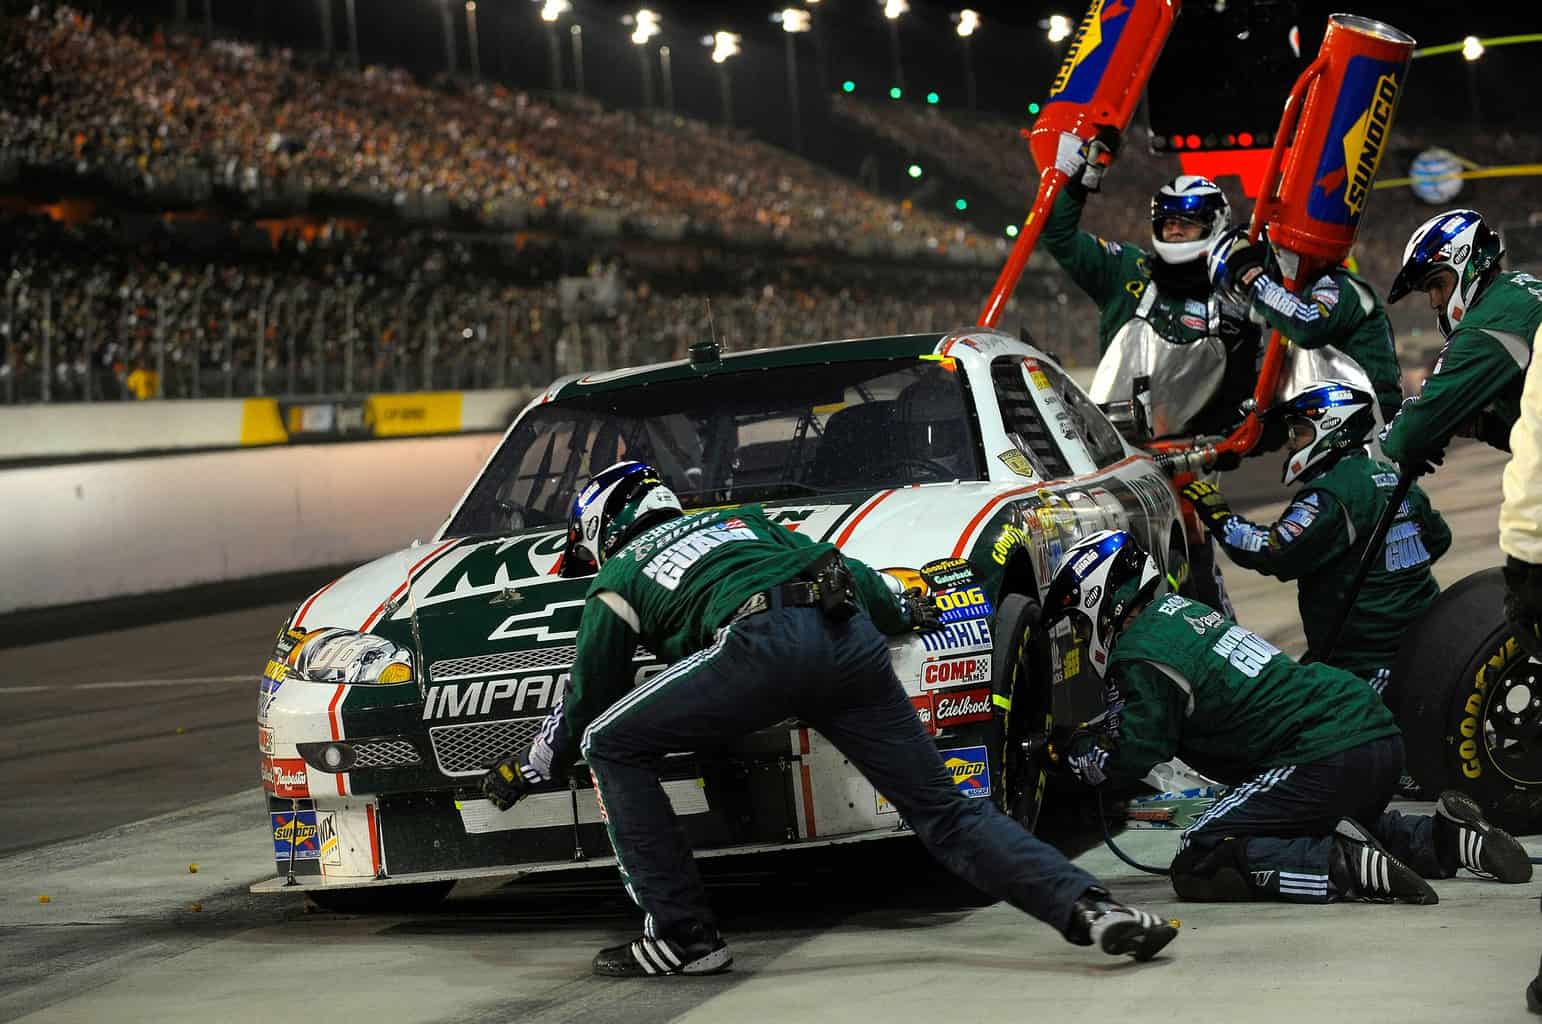 Nascar pitstop mechanic is seen using an impact wrench